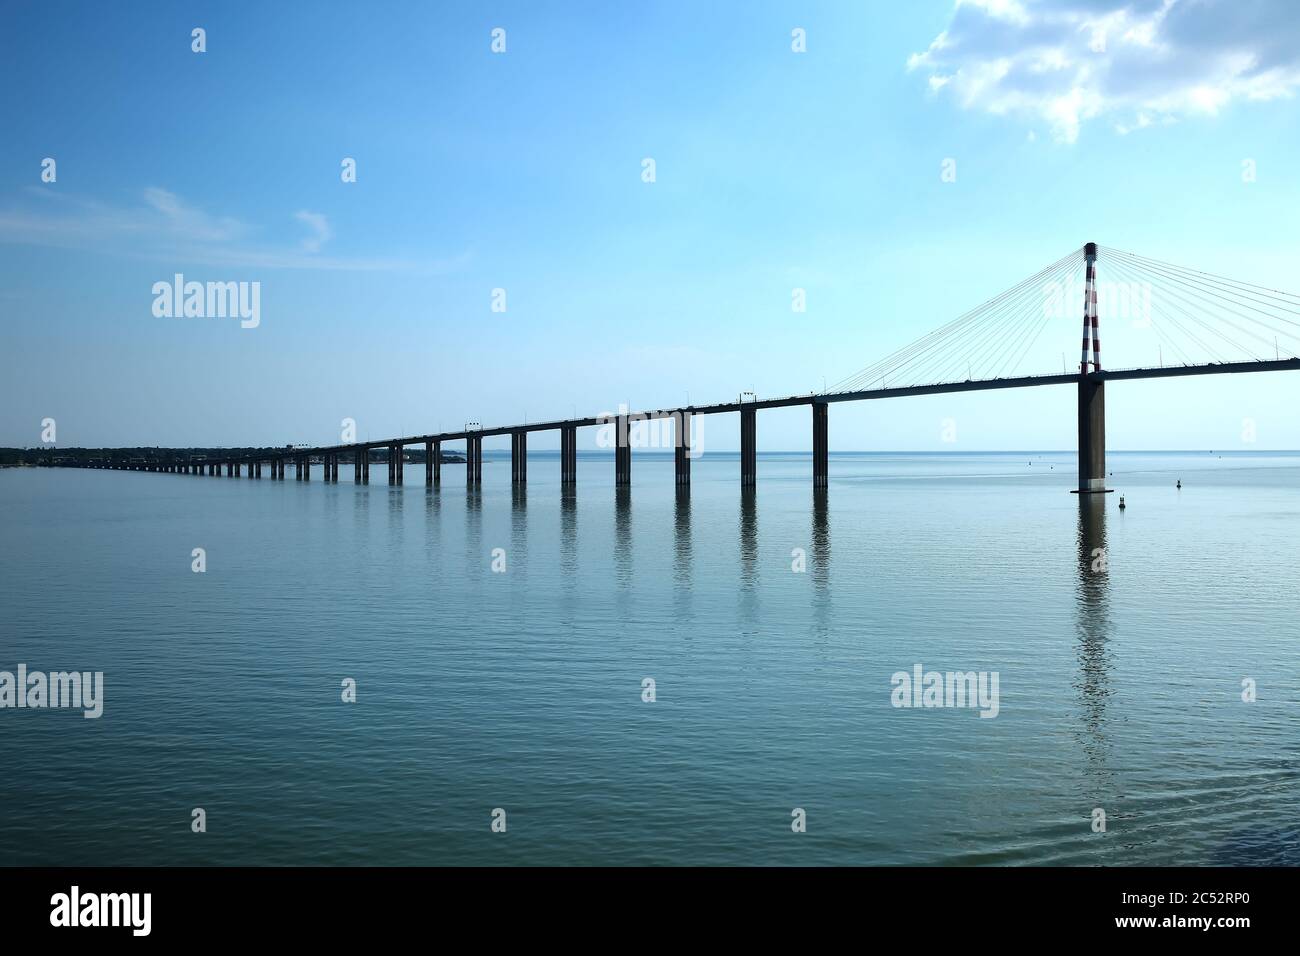 View of the Saint-Nazaire Bridge which is a cable-stayed bridge spanning the Loire River, linking Saint-Nazaire to Saint-Brevin-les-Pins, France. Stock Photo